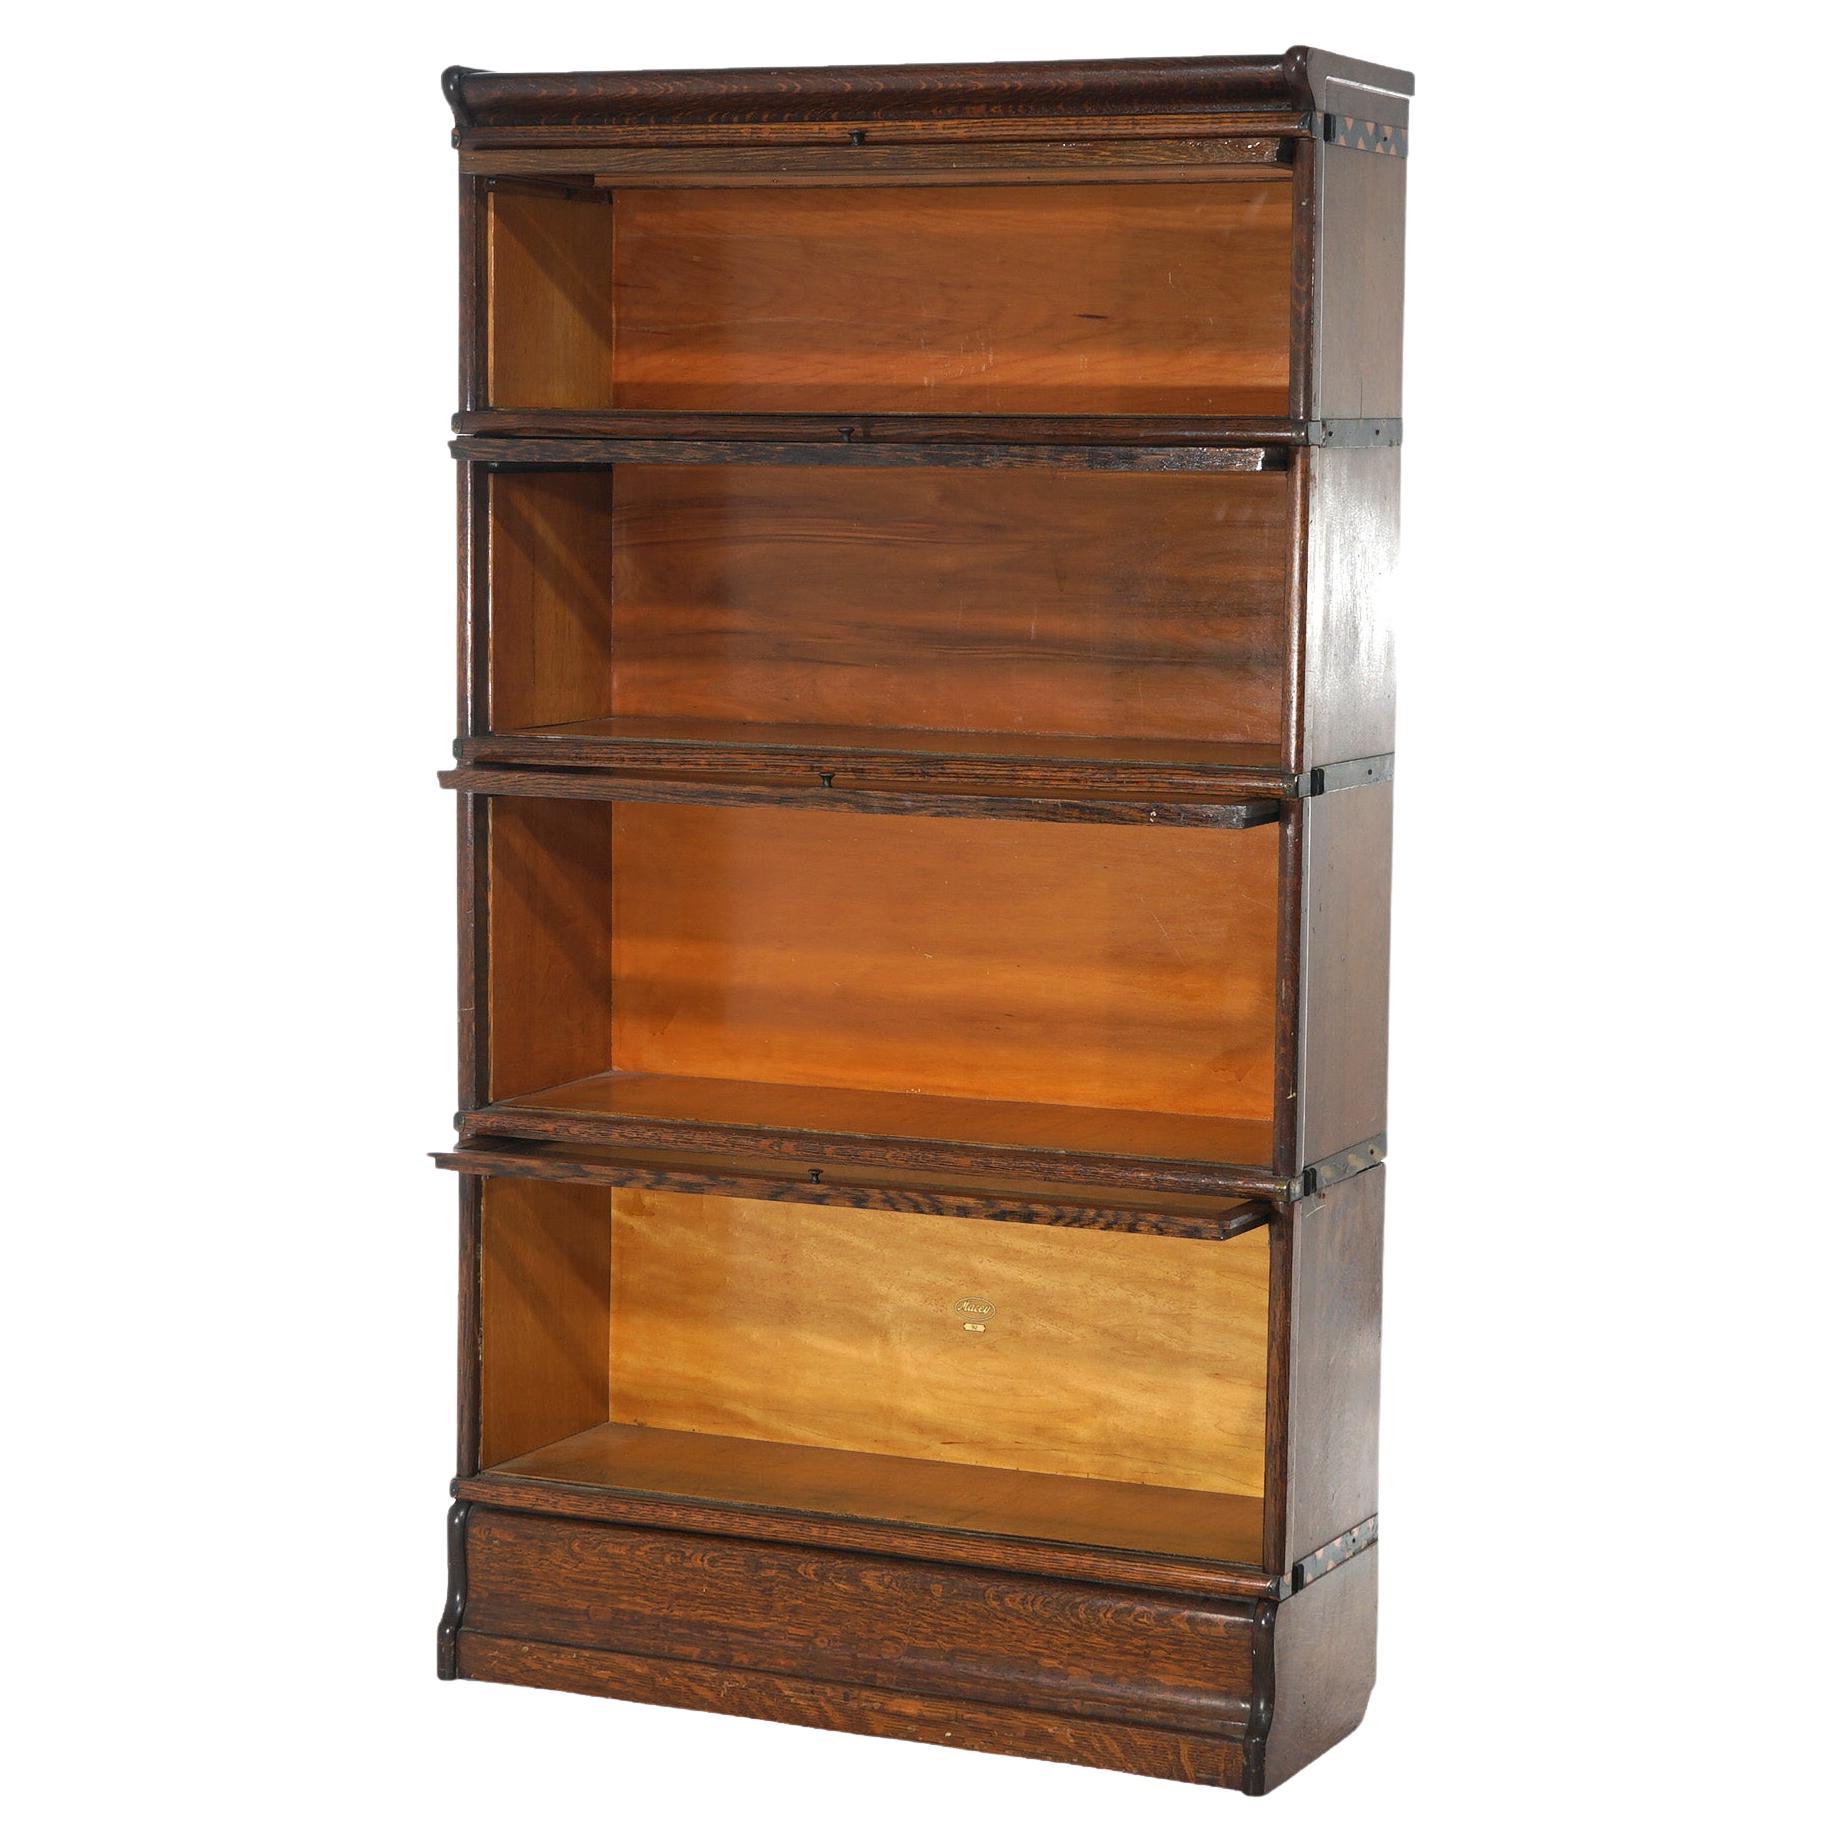 An antique Arts and Crafts Macey Mission barrister bookcase offers quarter sawn oak construction with four stacks, each having pullout glass doors, raised on ogee base, c1910

Measures - Overall 61.5''H x 34''W x 12.5''D; Shelf 1: 8.25''H x 31.5''W